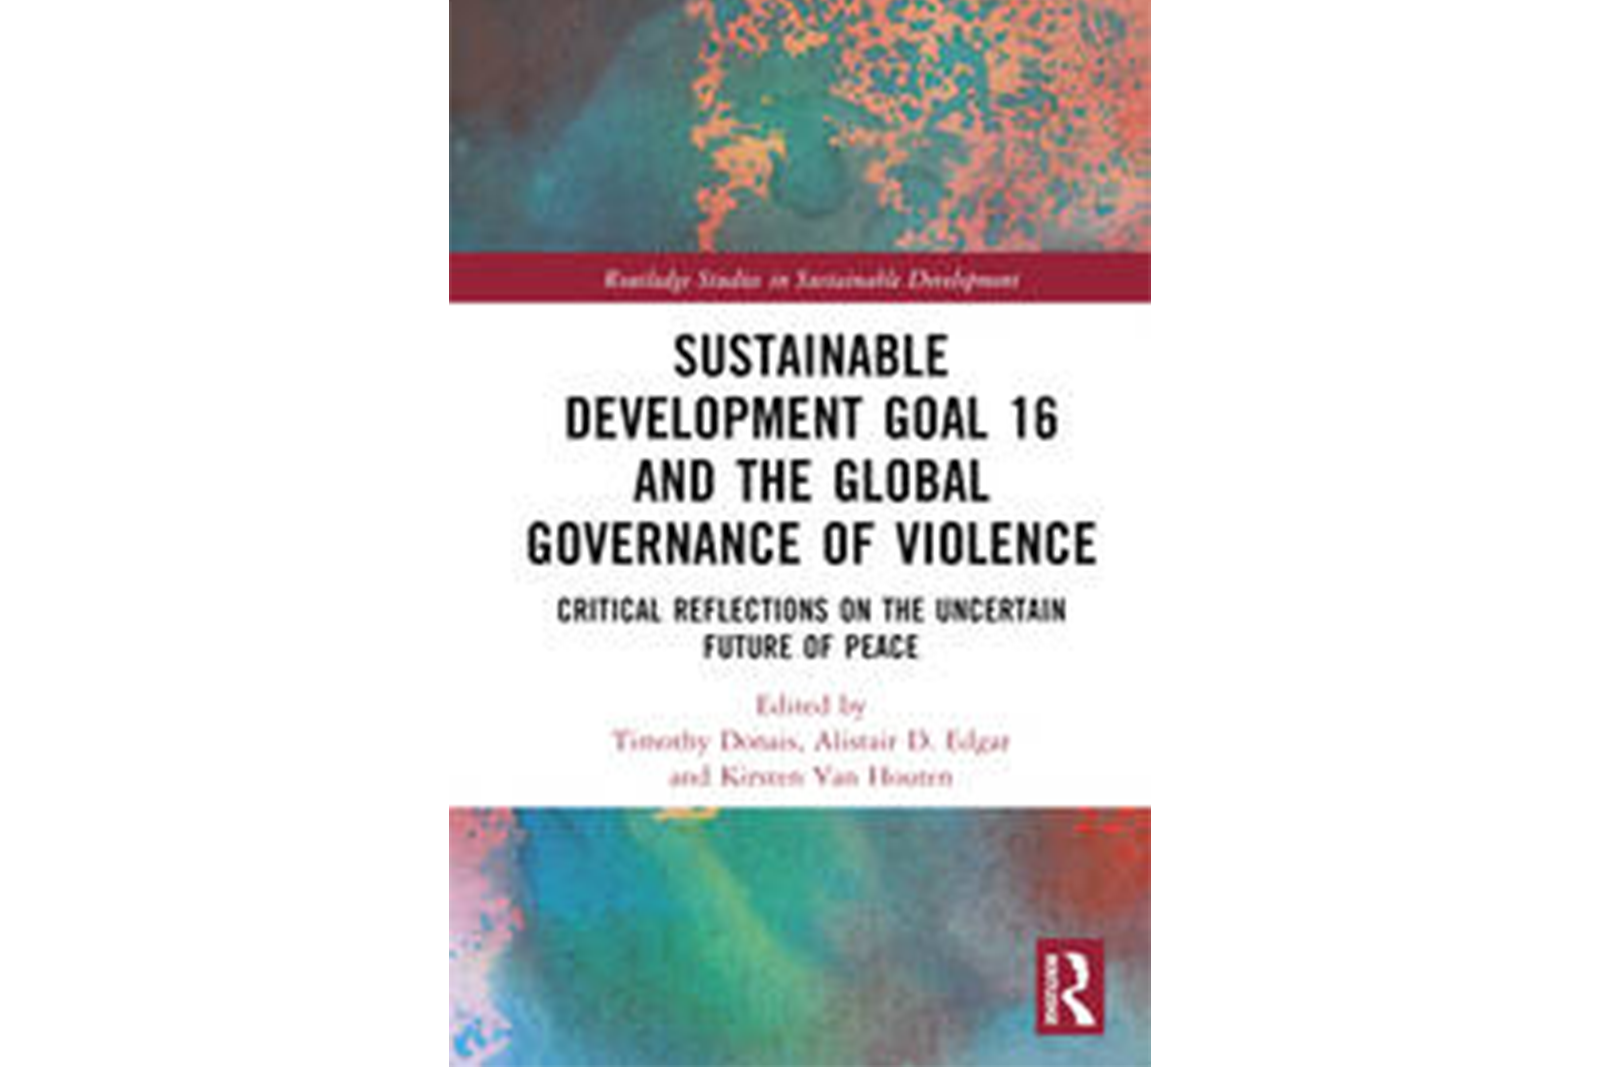 Sustainable Development Goal 16 and the Global Governance of Violence Critical Reflections on the Uncertain Future of Peace book cover